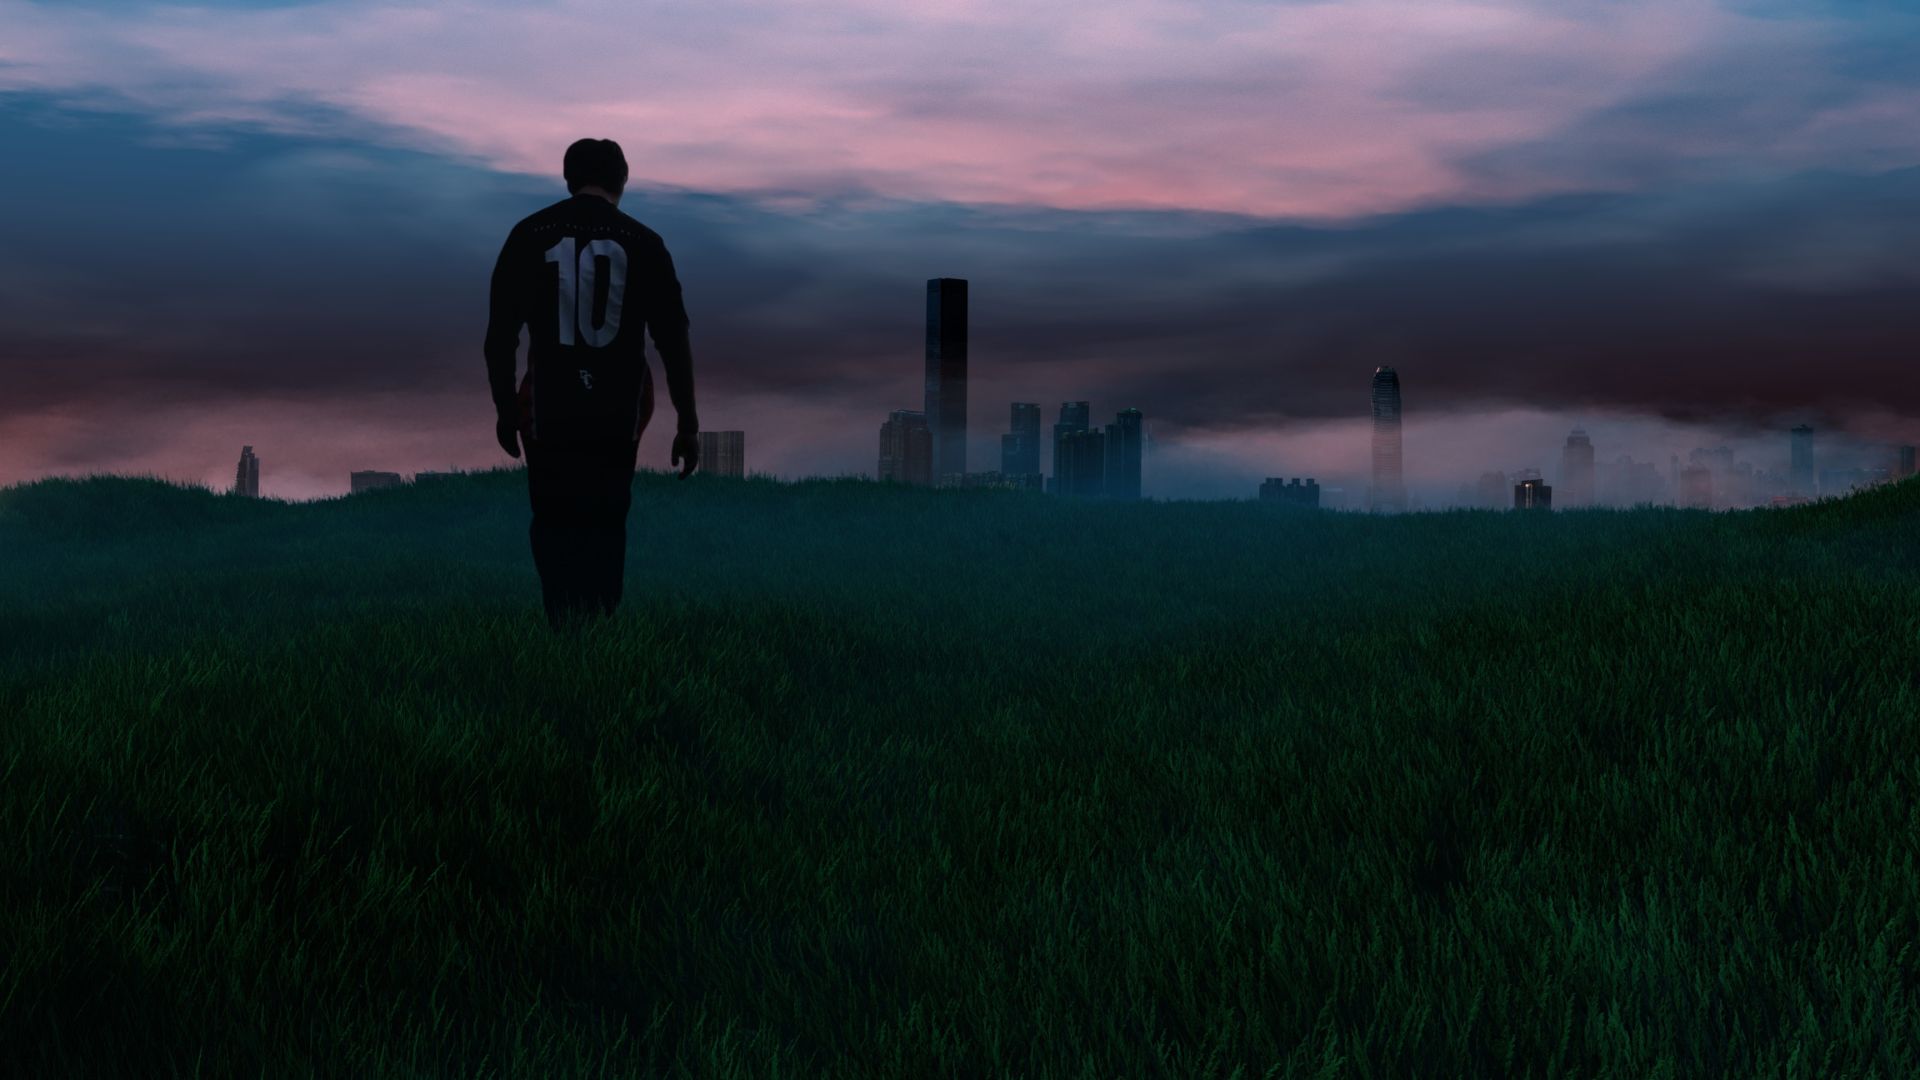 digital image of person in jersey #10 walking through grass toward city